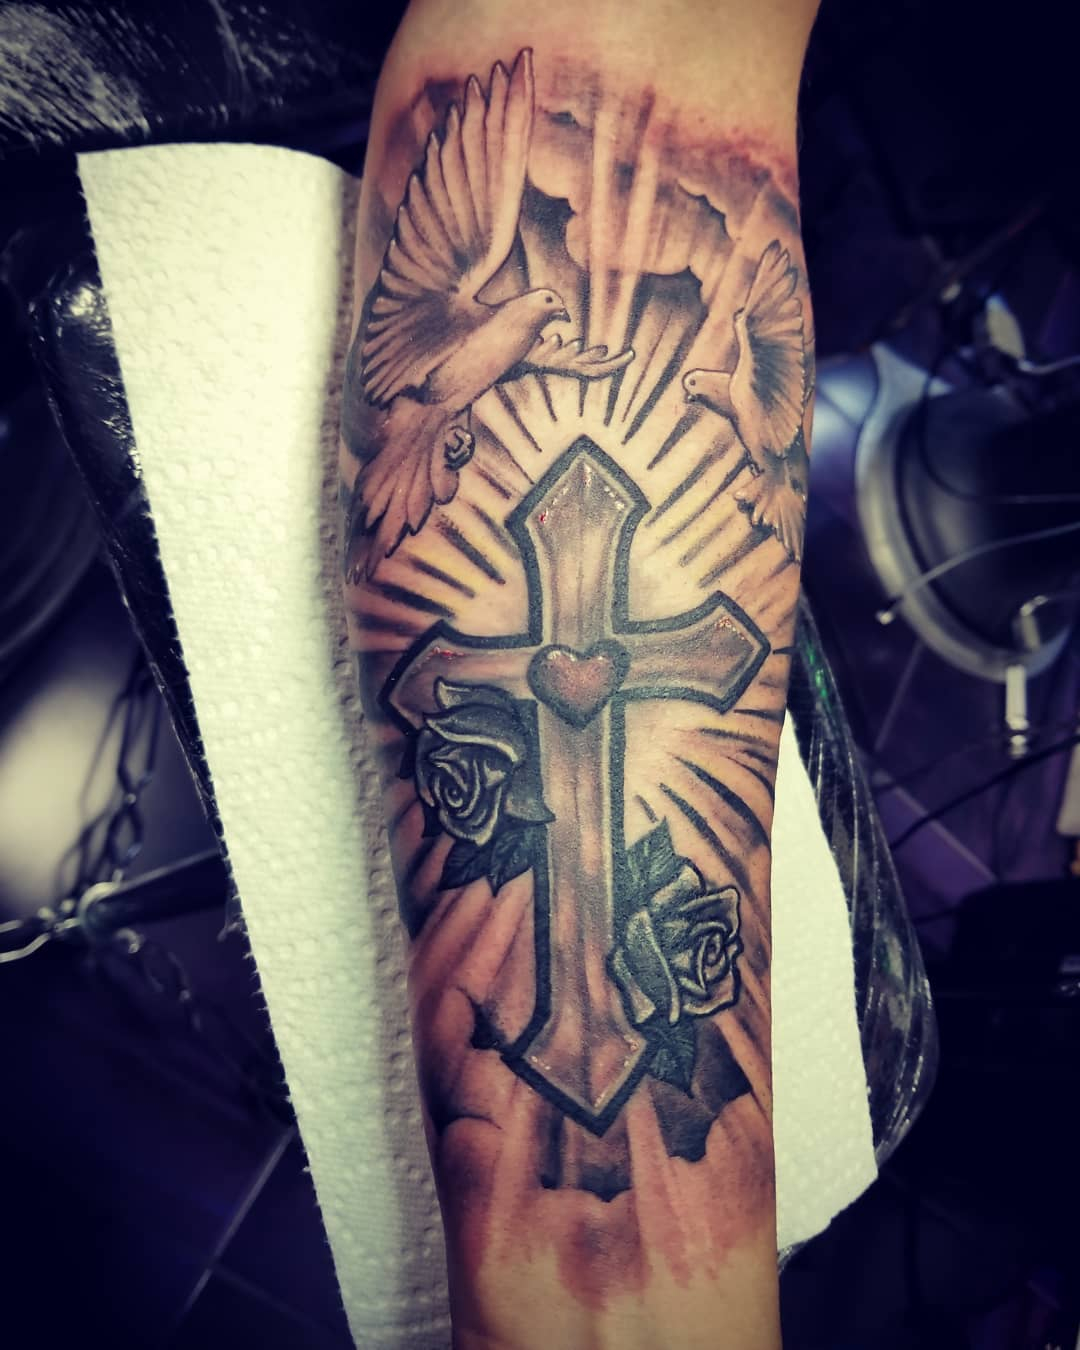 125 Best Cross Tattoos You Can Try Meanings Wild Tattoo Art in sizing 1080 X 1350